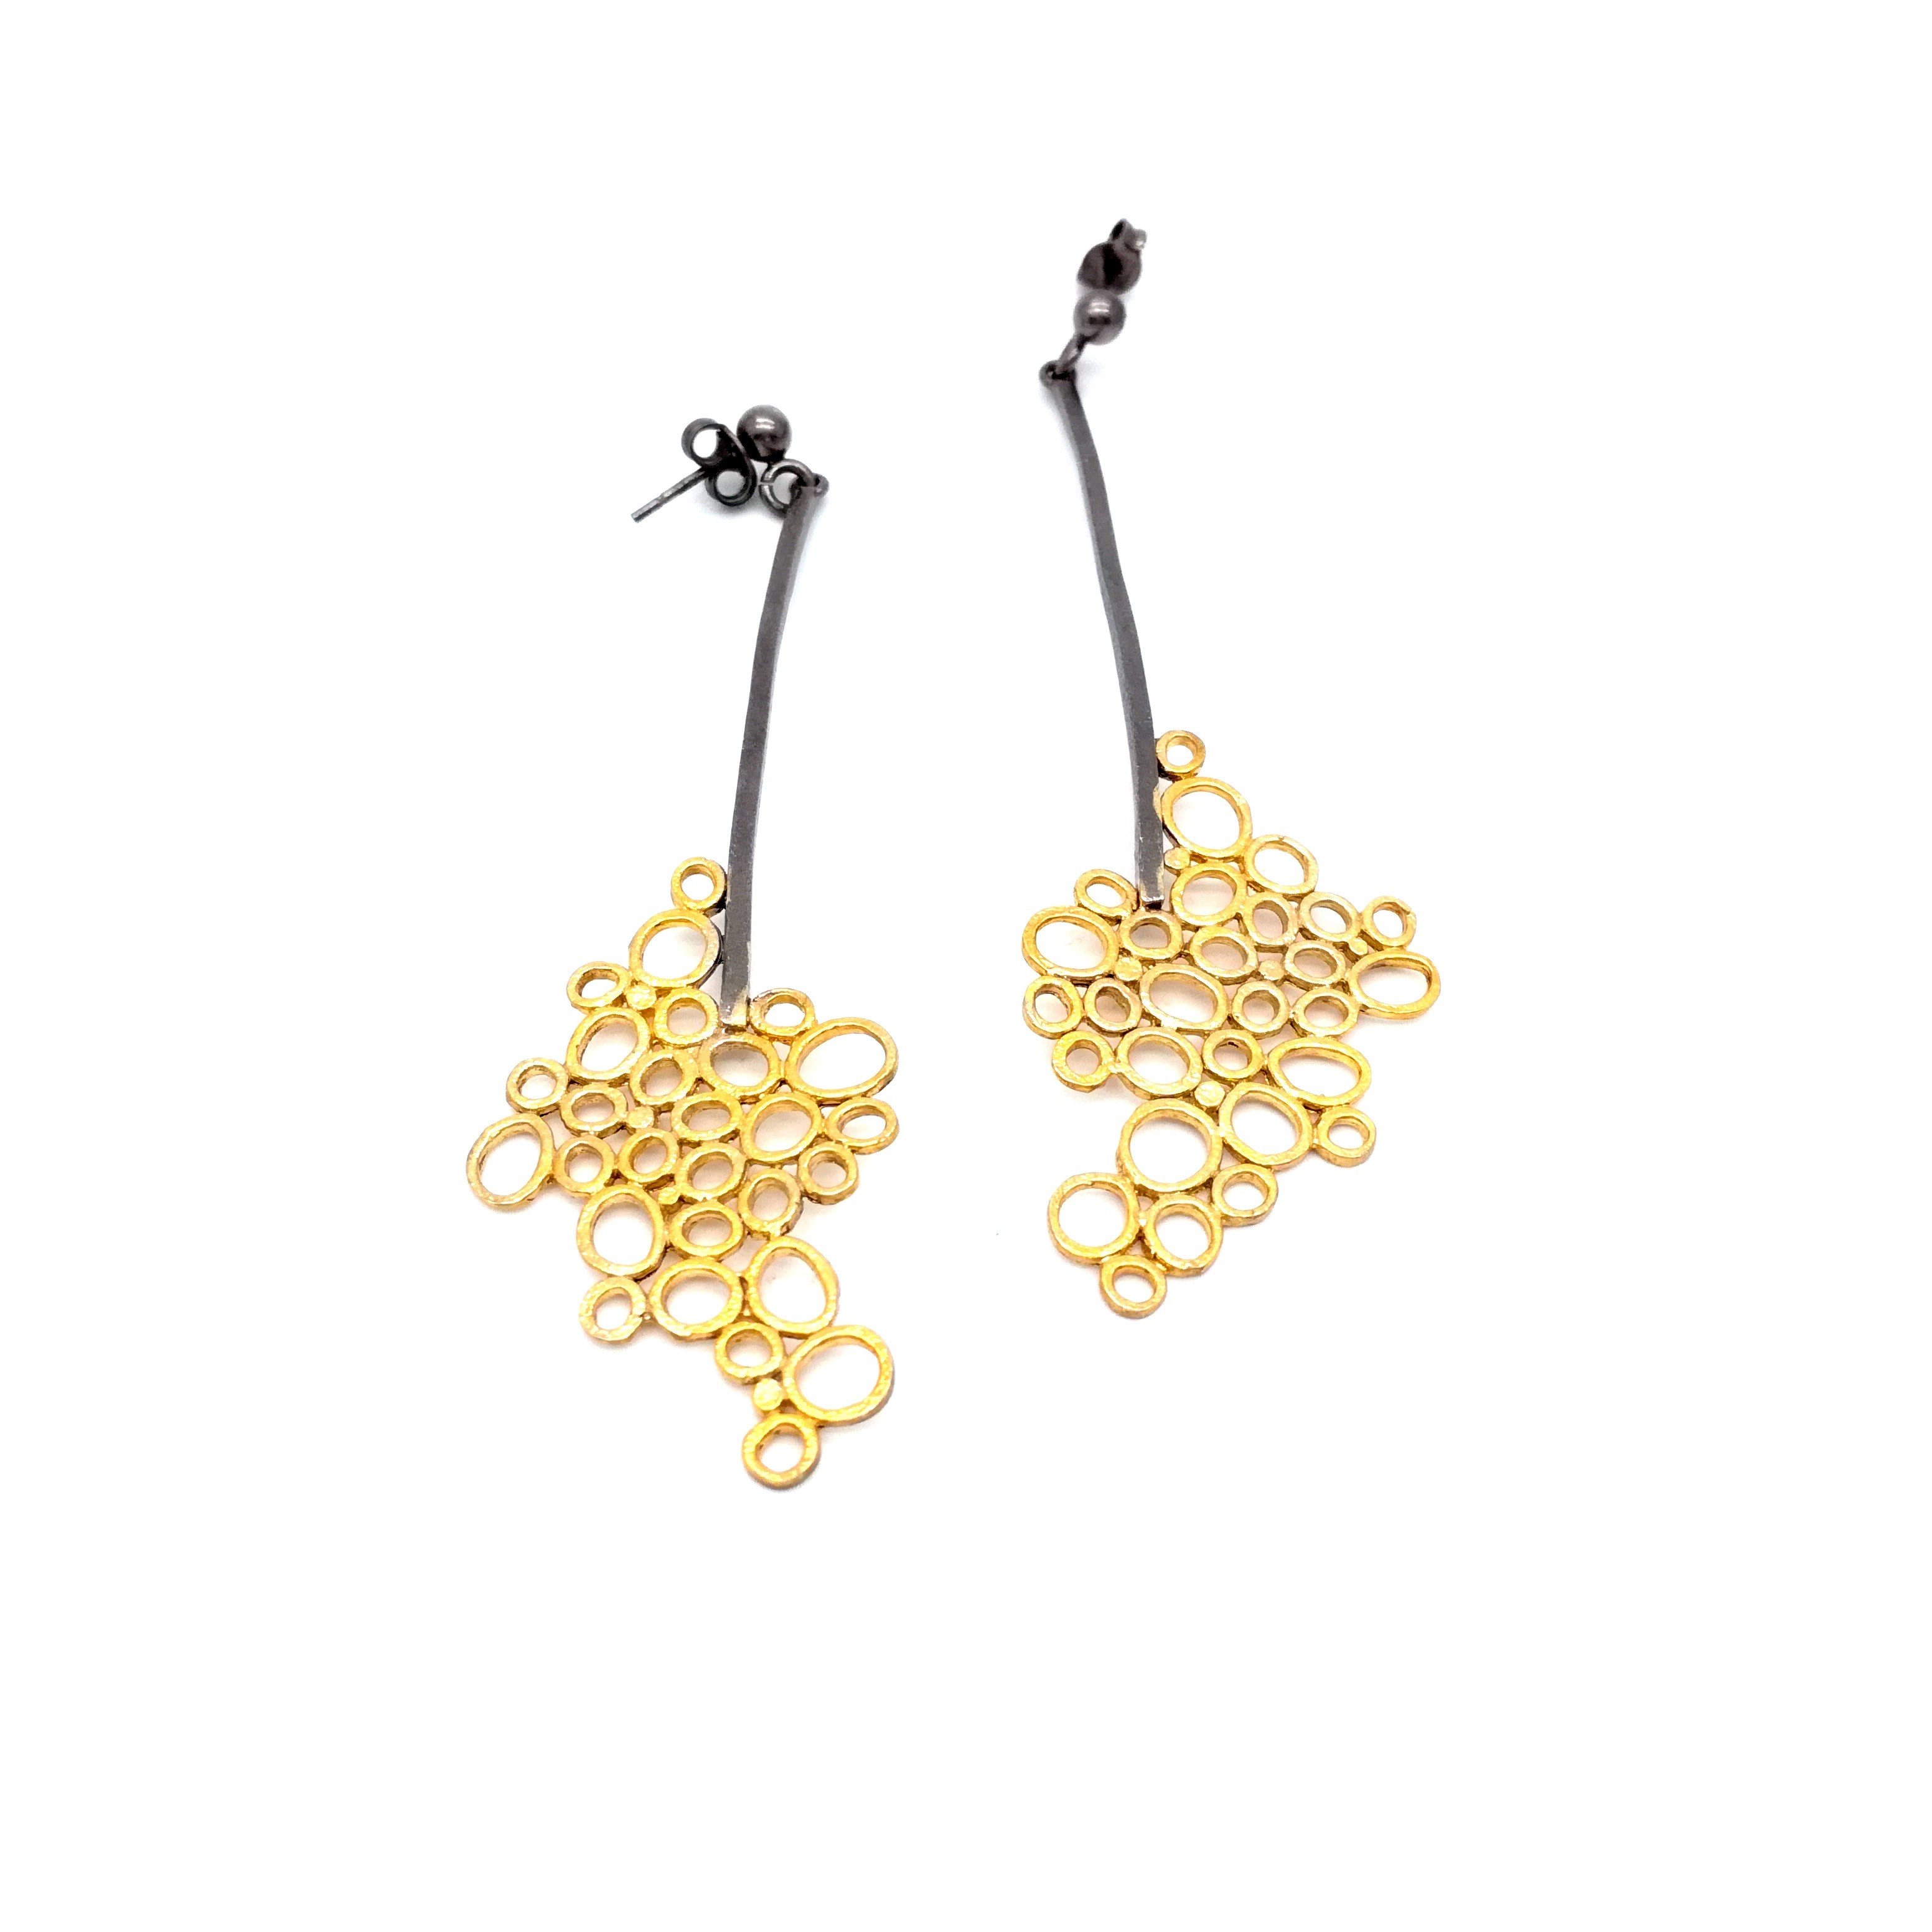 Silver earrings 925 black rhodium and gold plated 